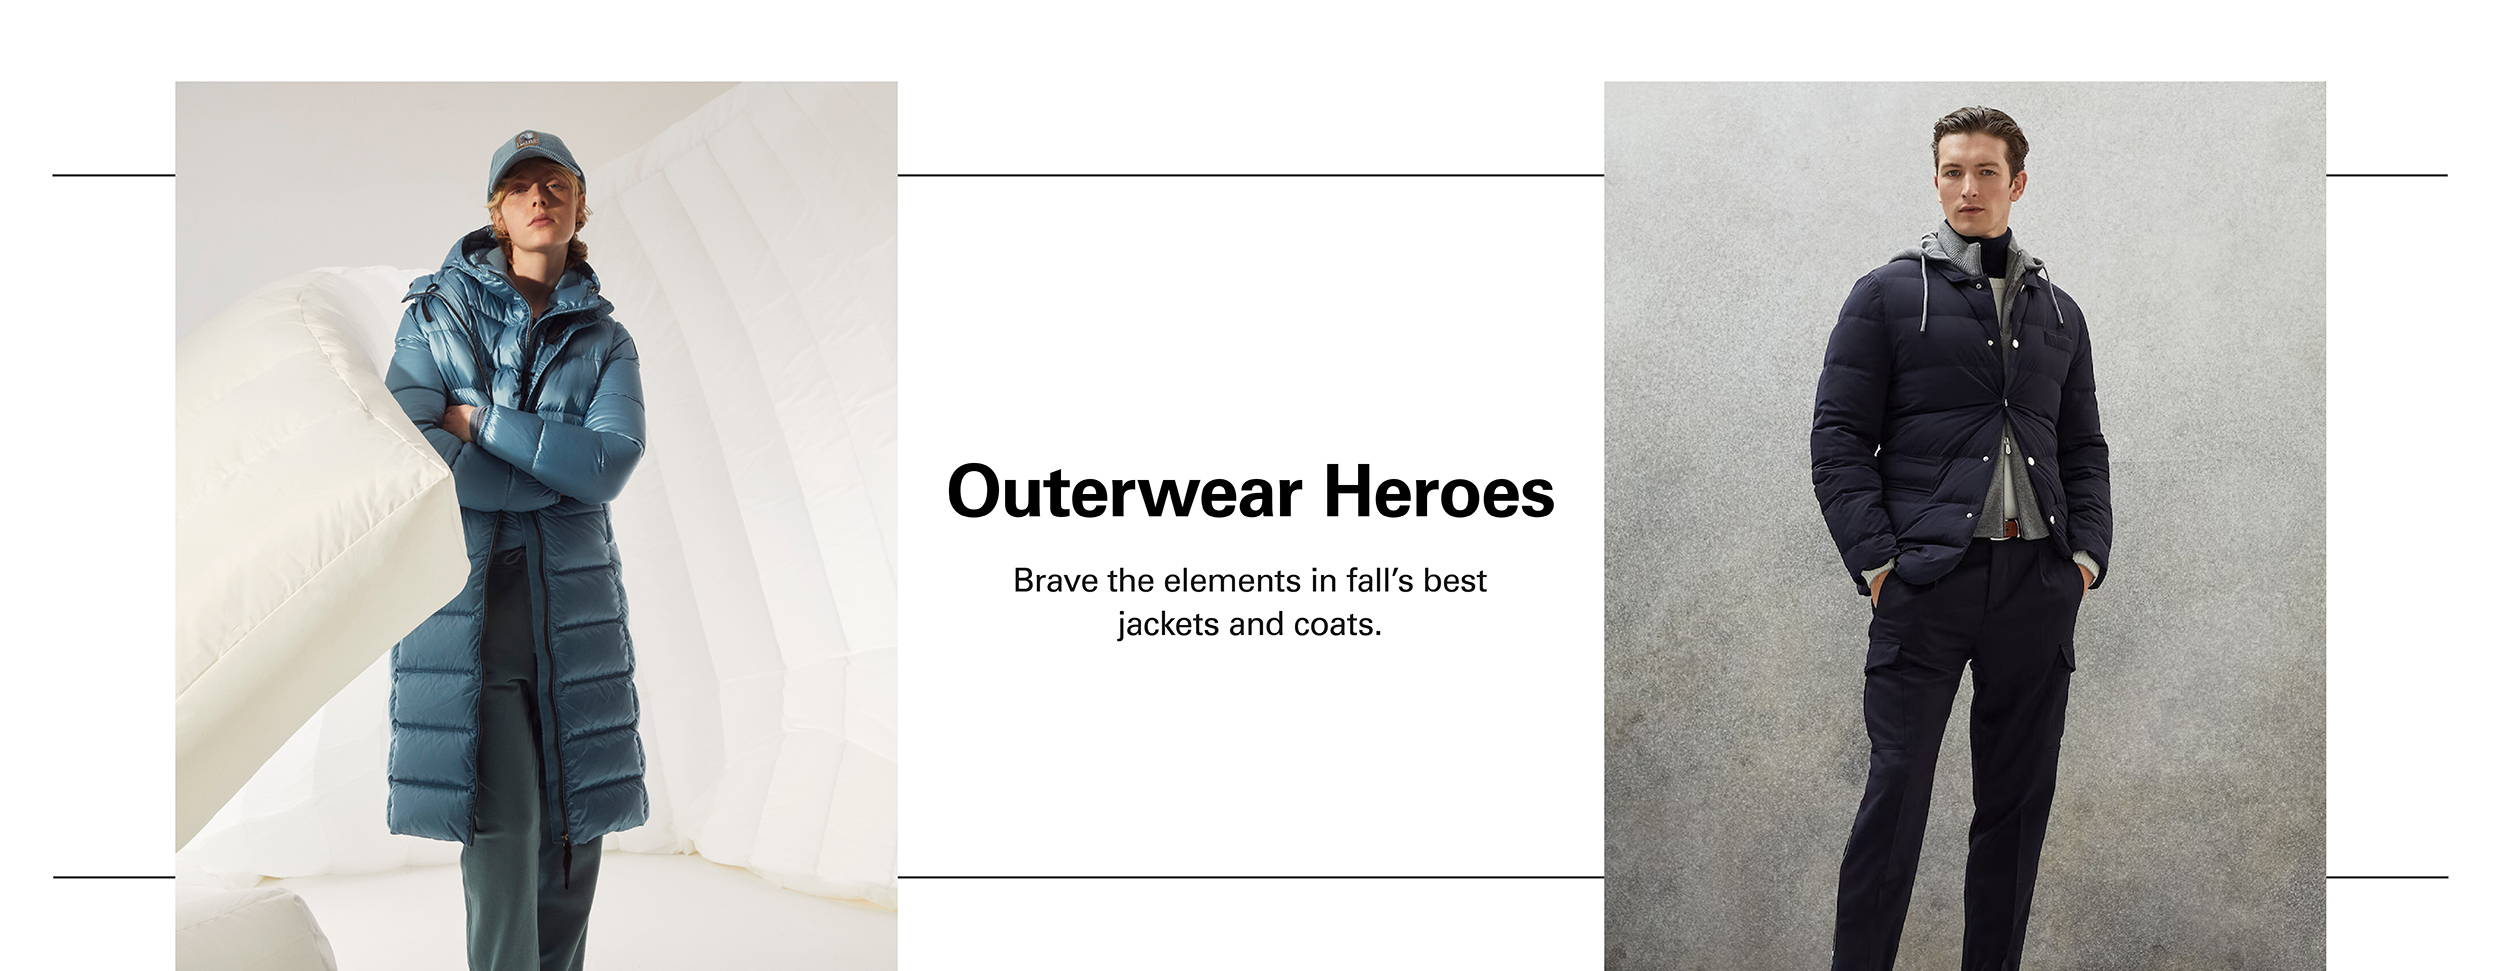 Outerwear Heroes